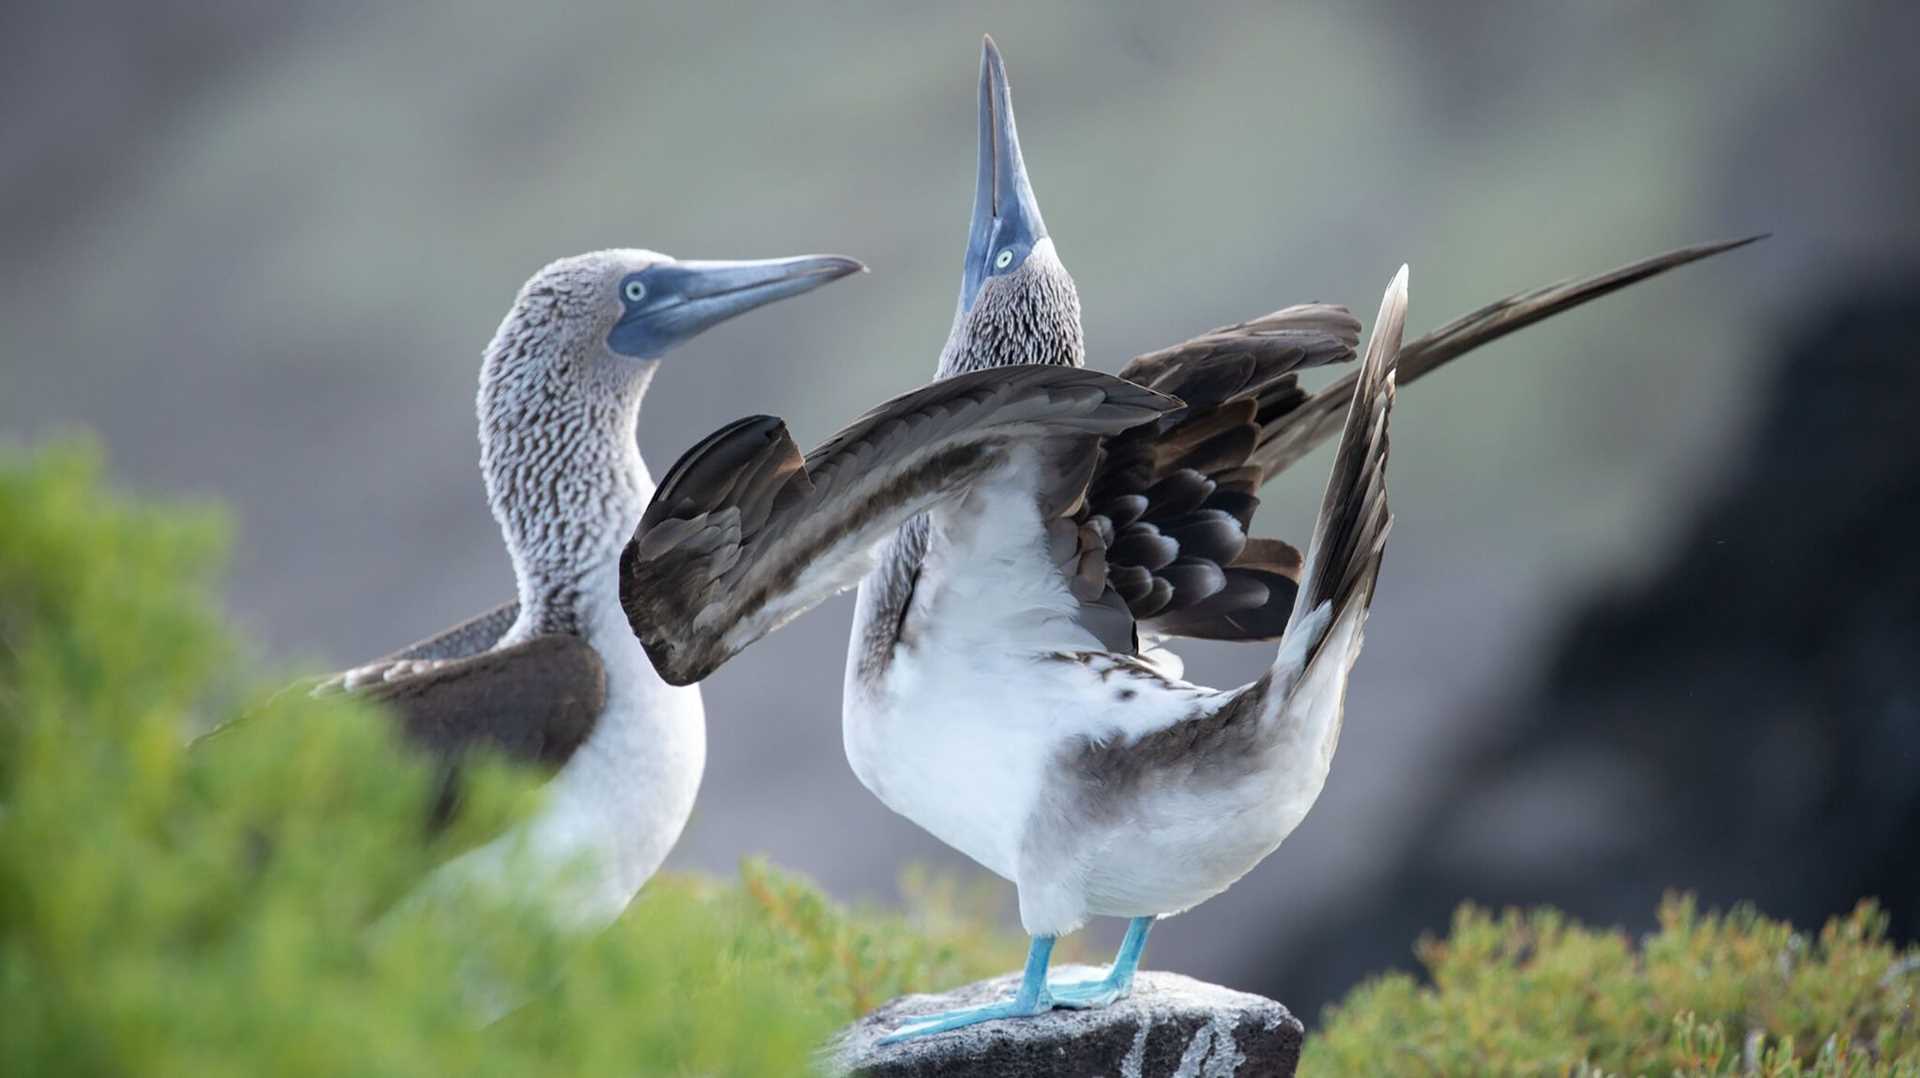 two blue-footed boobies